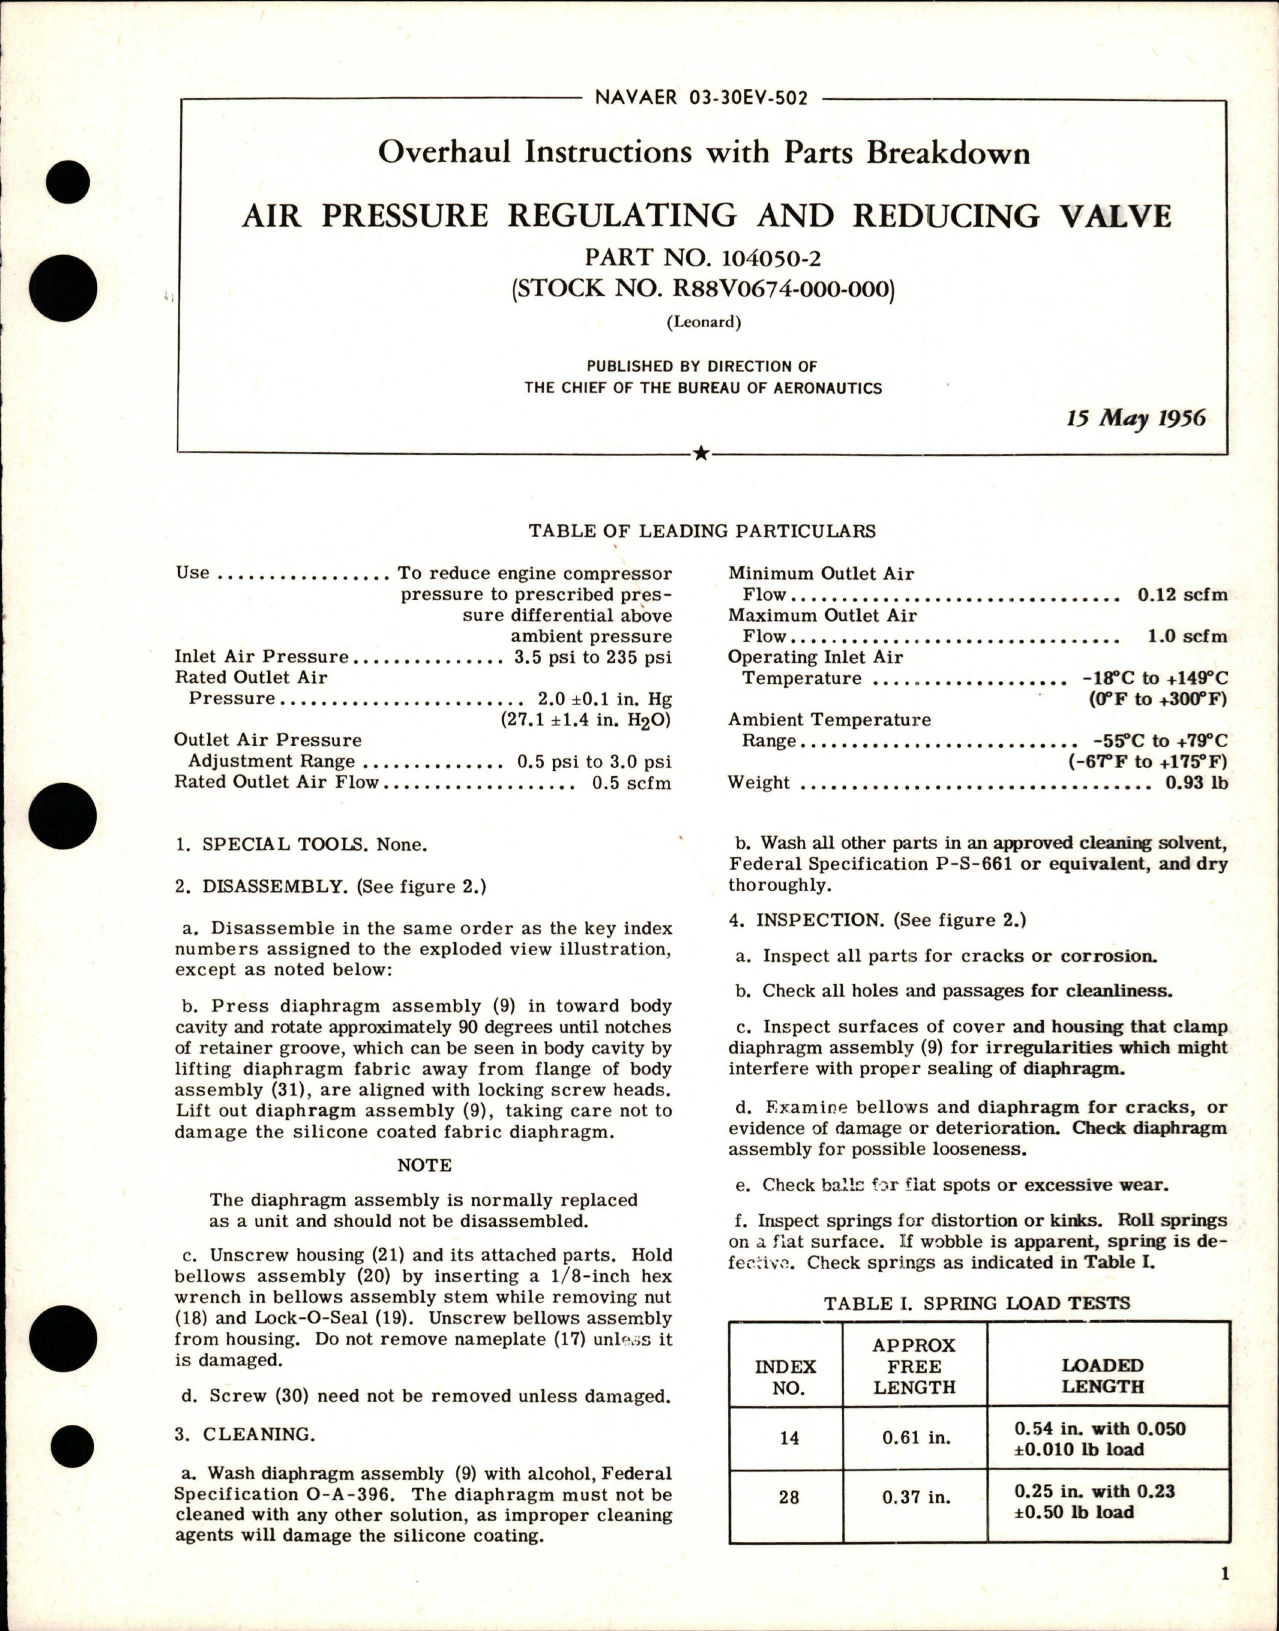 Sample page 1 from AirCorps Library document: Overhaul Instructions with Parts Breakdown for Air Pressure Regulating & Reducing Valve - Part 104050-2